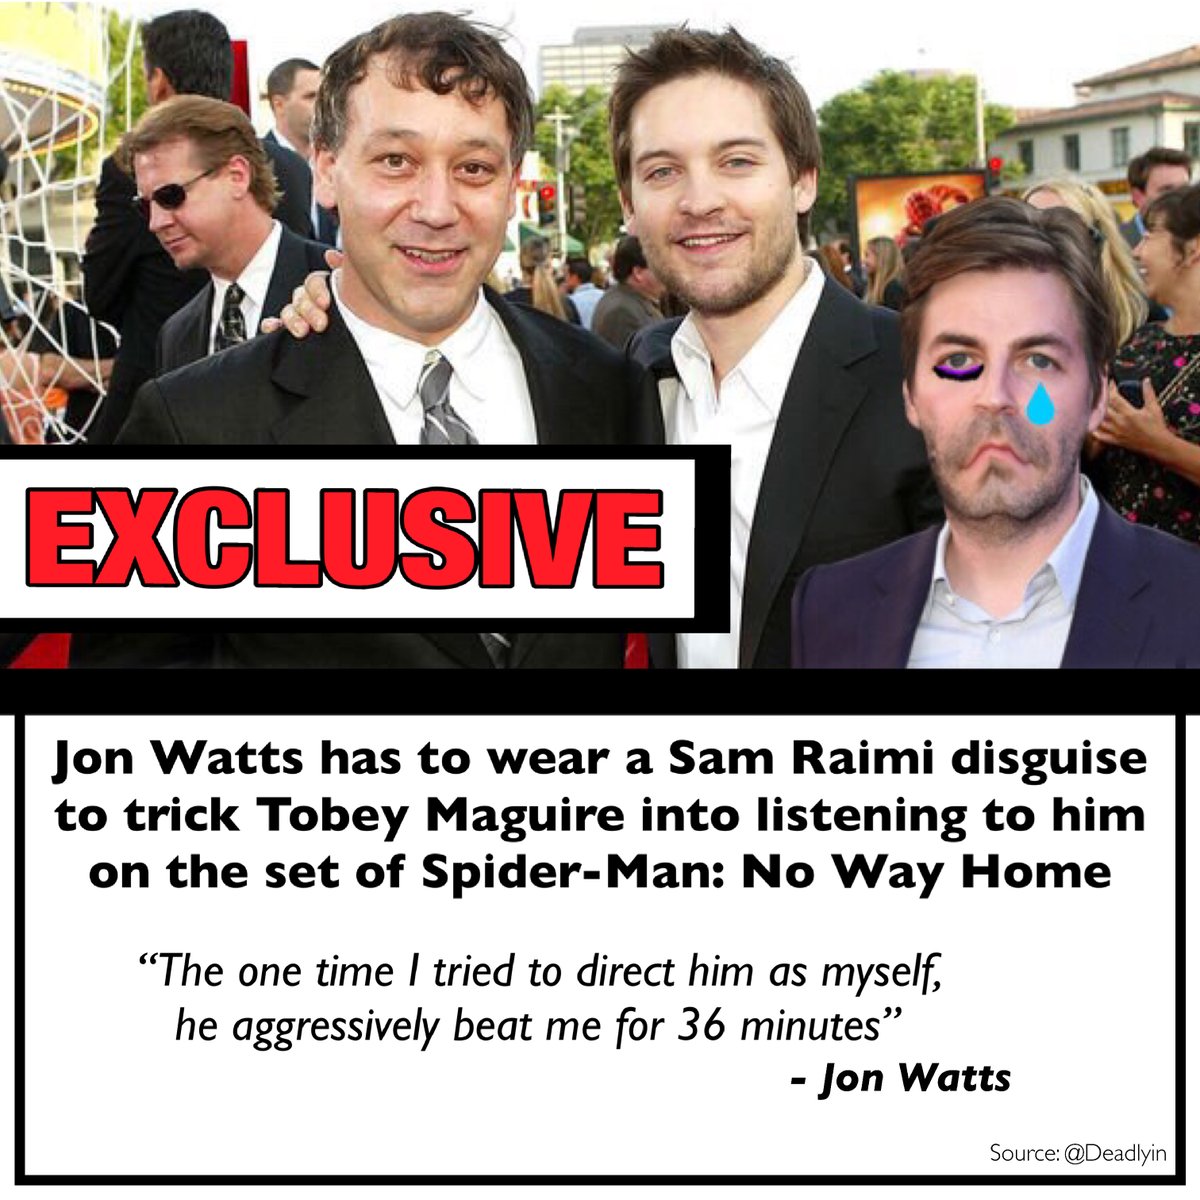 He probably thinks he’s filming Spider-Man 4.

(this definitely isn’t a new thing we’re trying called Fake News Fridays)

#spiderman #spidermannowayhome #tobeymaguire #samraimi #jonwatts #marvel #mcu #disney #tomholland #andrewgarfield #filmnews #filmupdate #fakenewsfriday